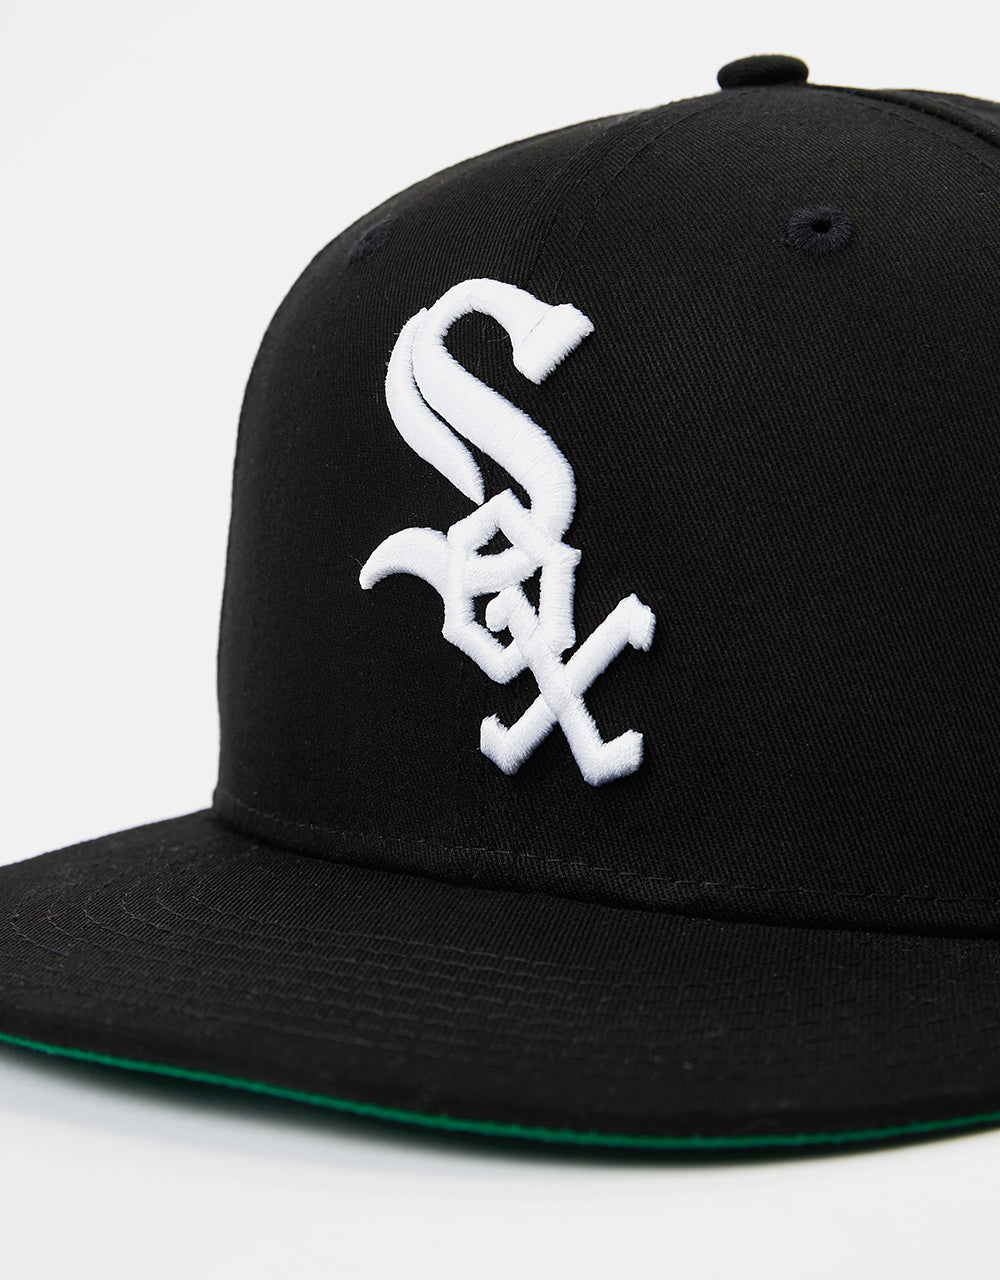 New Era 9Fifty® Chicago White Sox Team Side Patch Cap  - Black/White